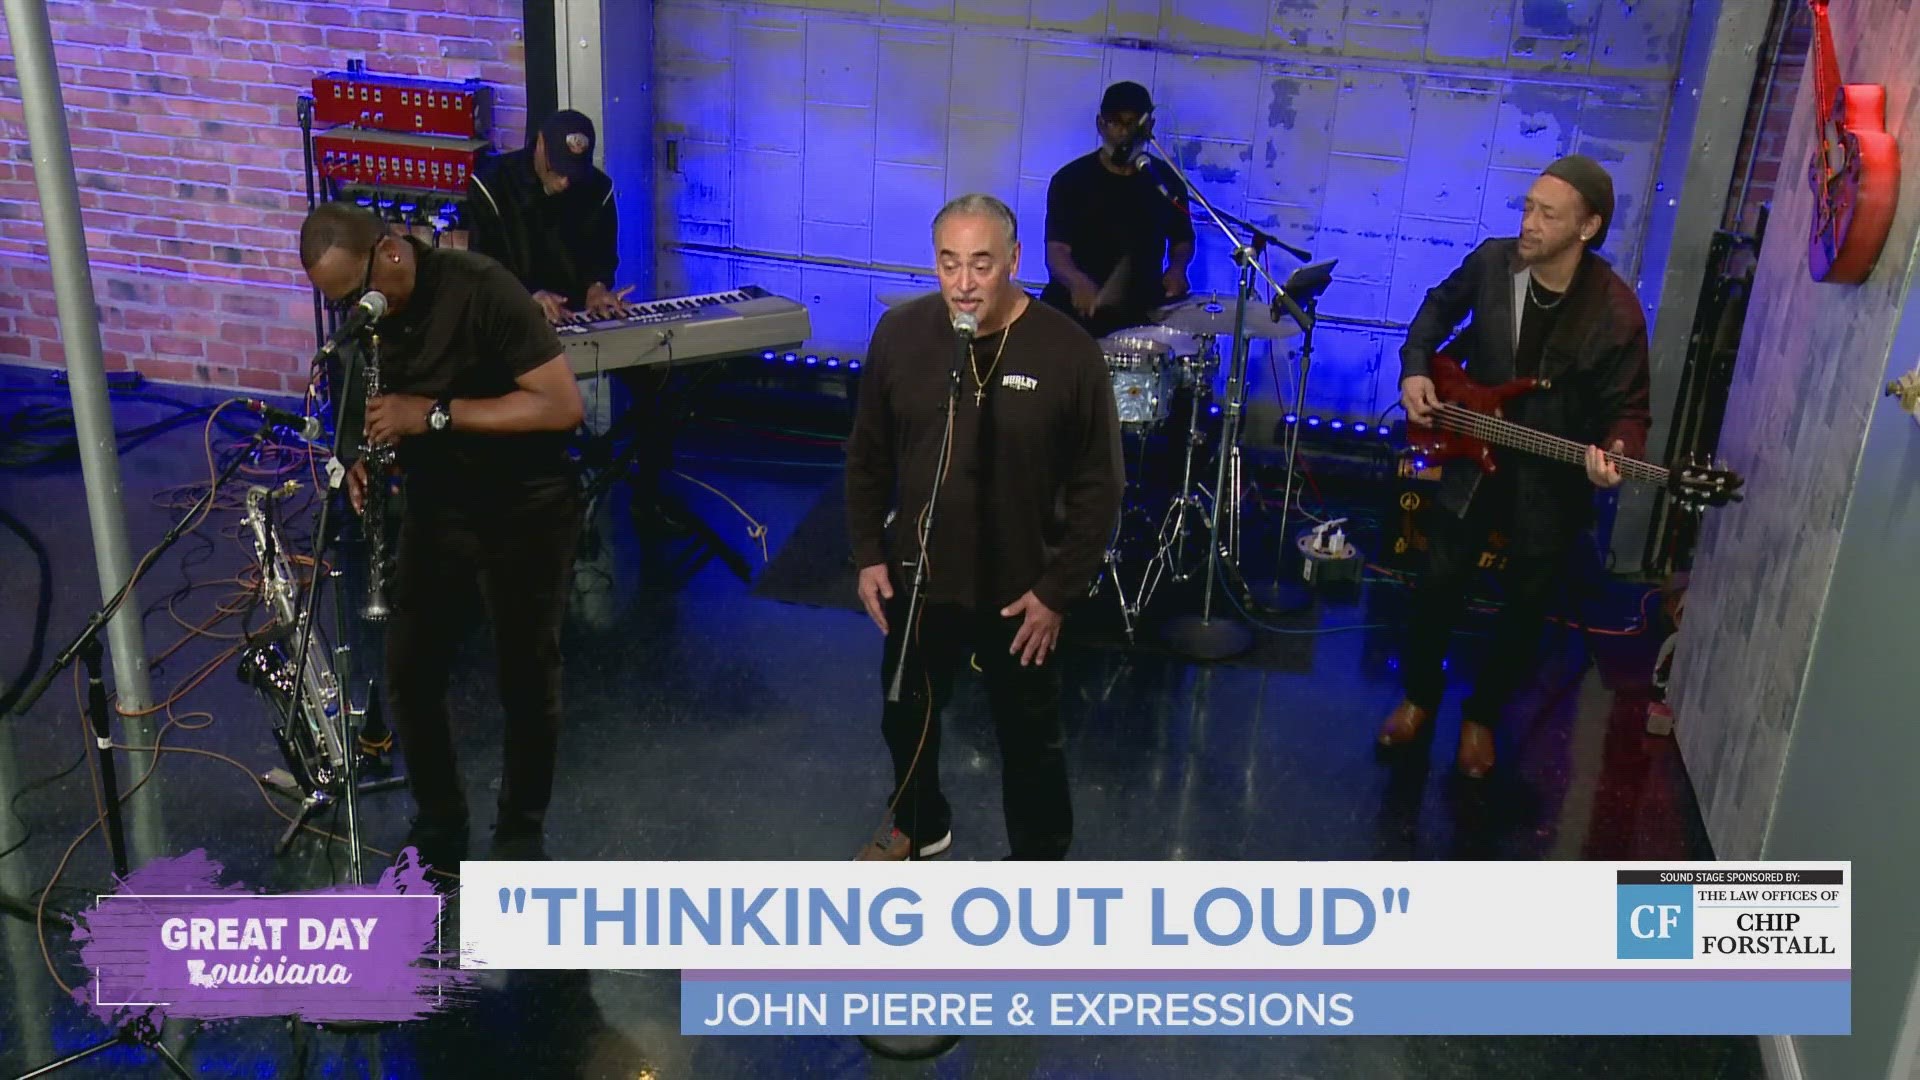 John Pierre & Expressions perform "Thinking Out Loud" in our Chip Forstall Sound Stage.